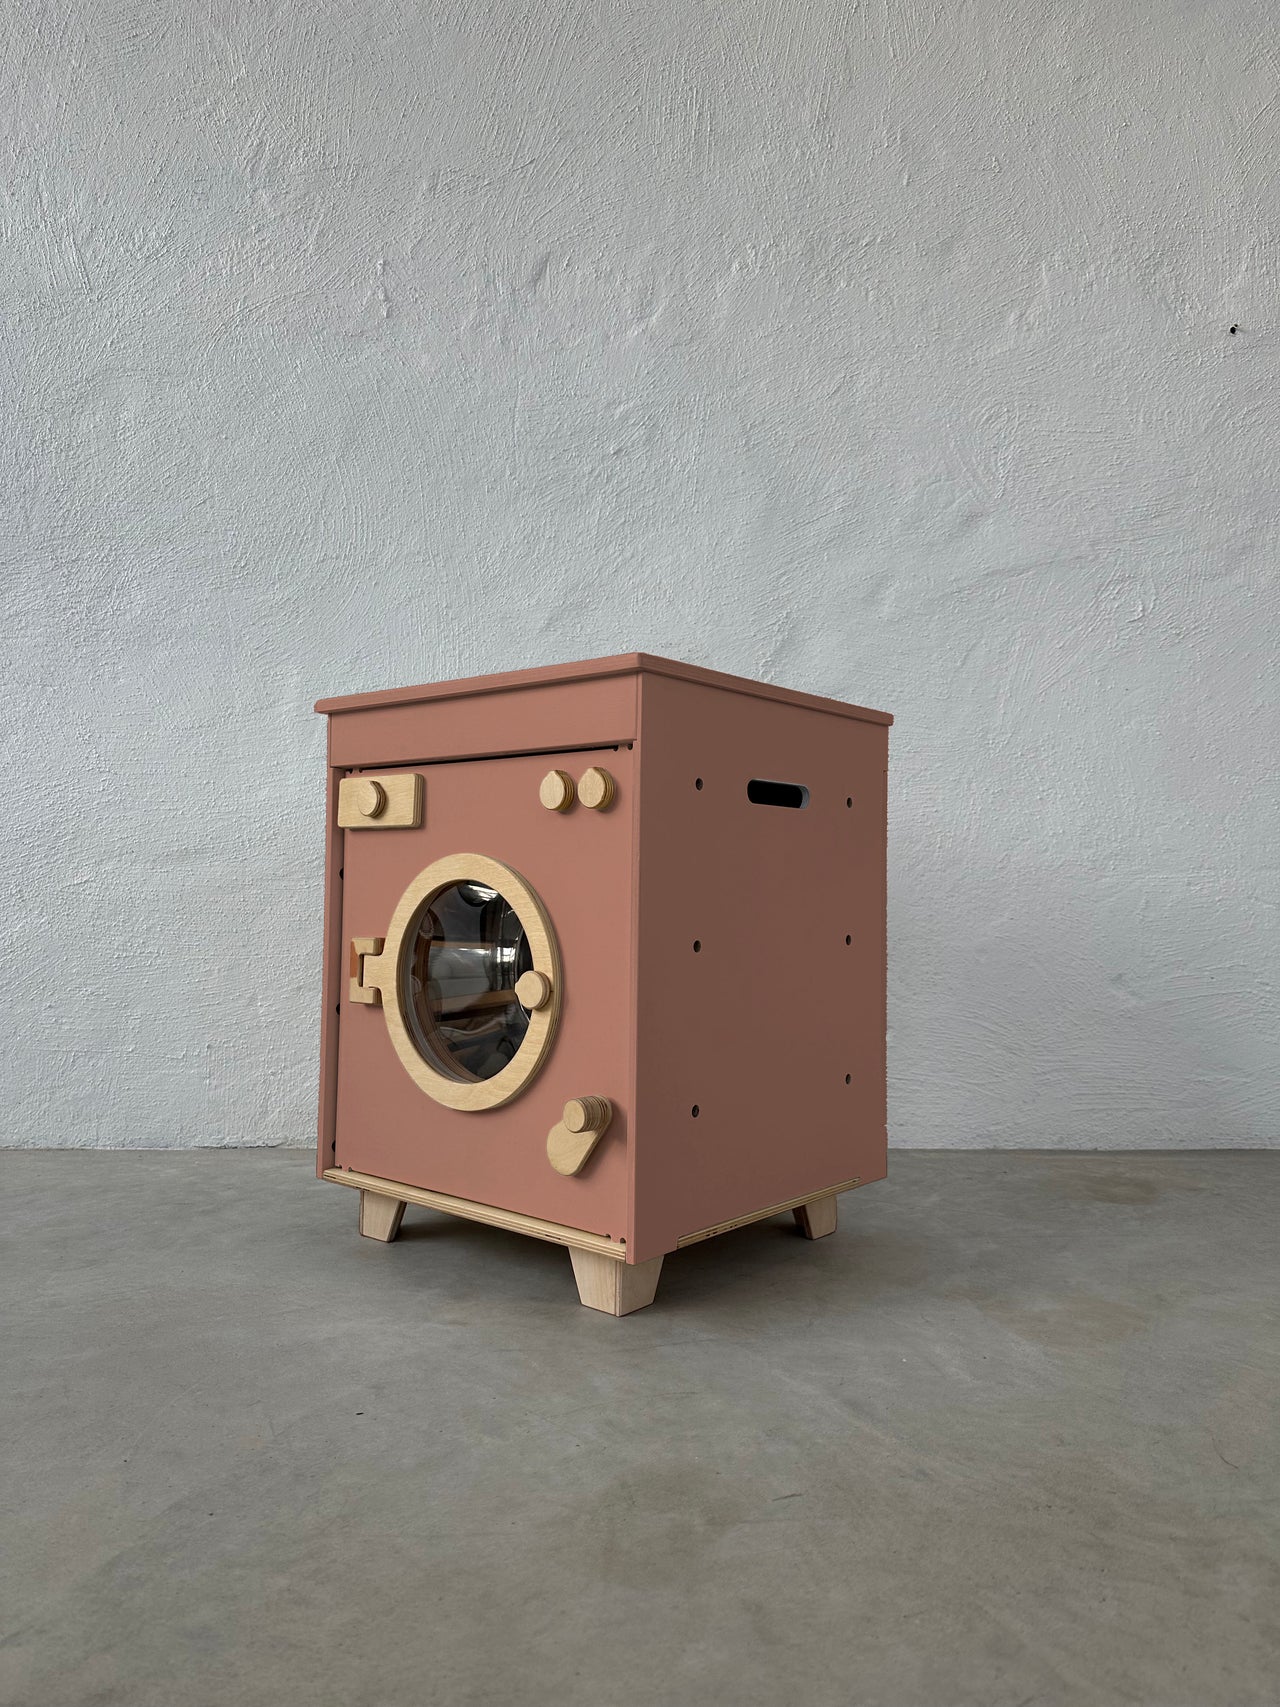 Wooden Washing Machine - Dusty Pink - MIDMINI - Handcrafted wooden toys for generations.